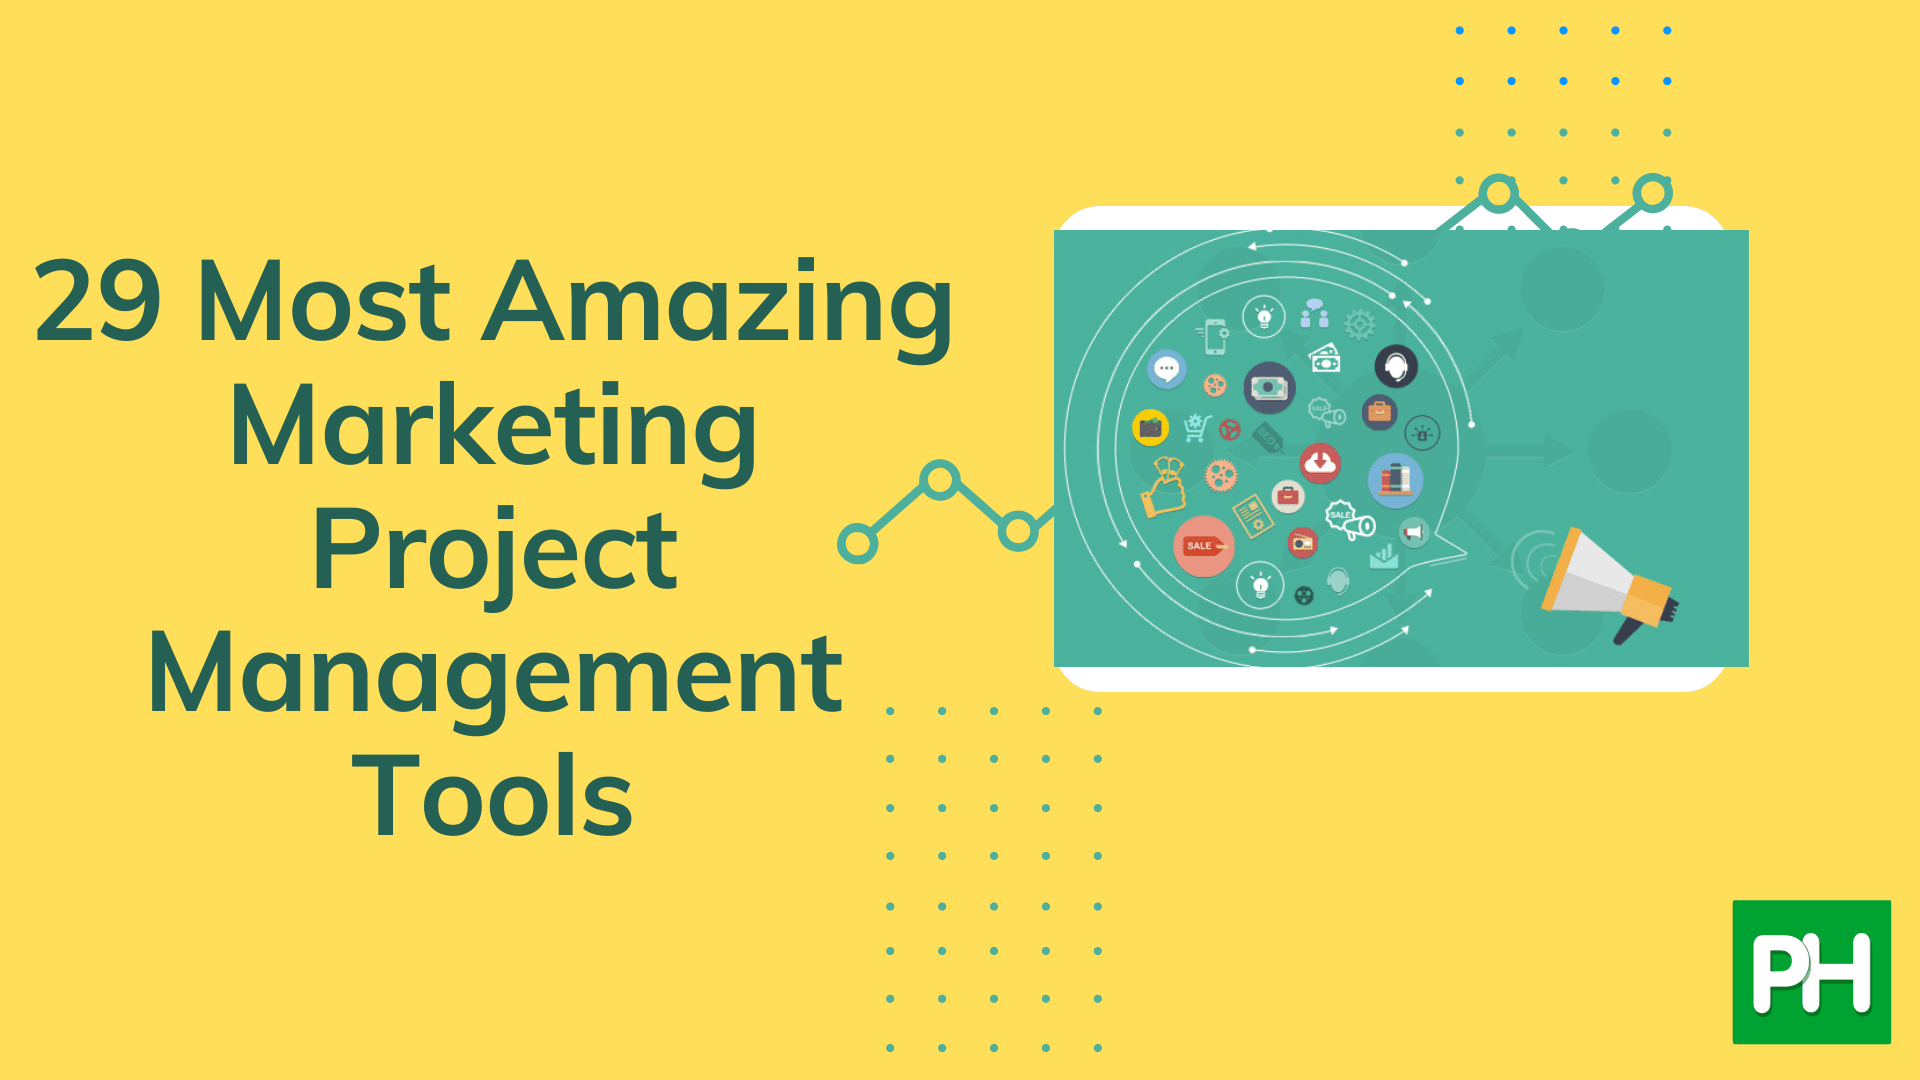 30 Most Amazing Marketing Project Management Tools to Use in 2023